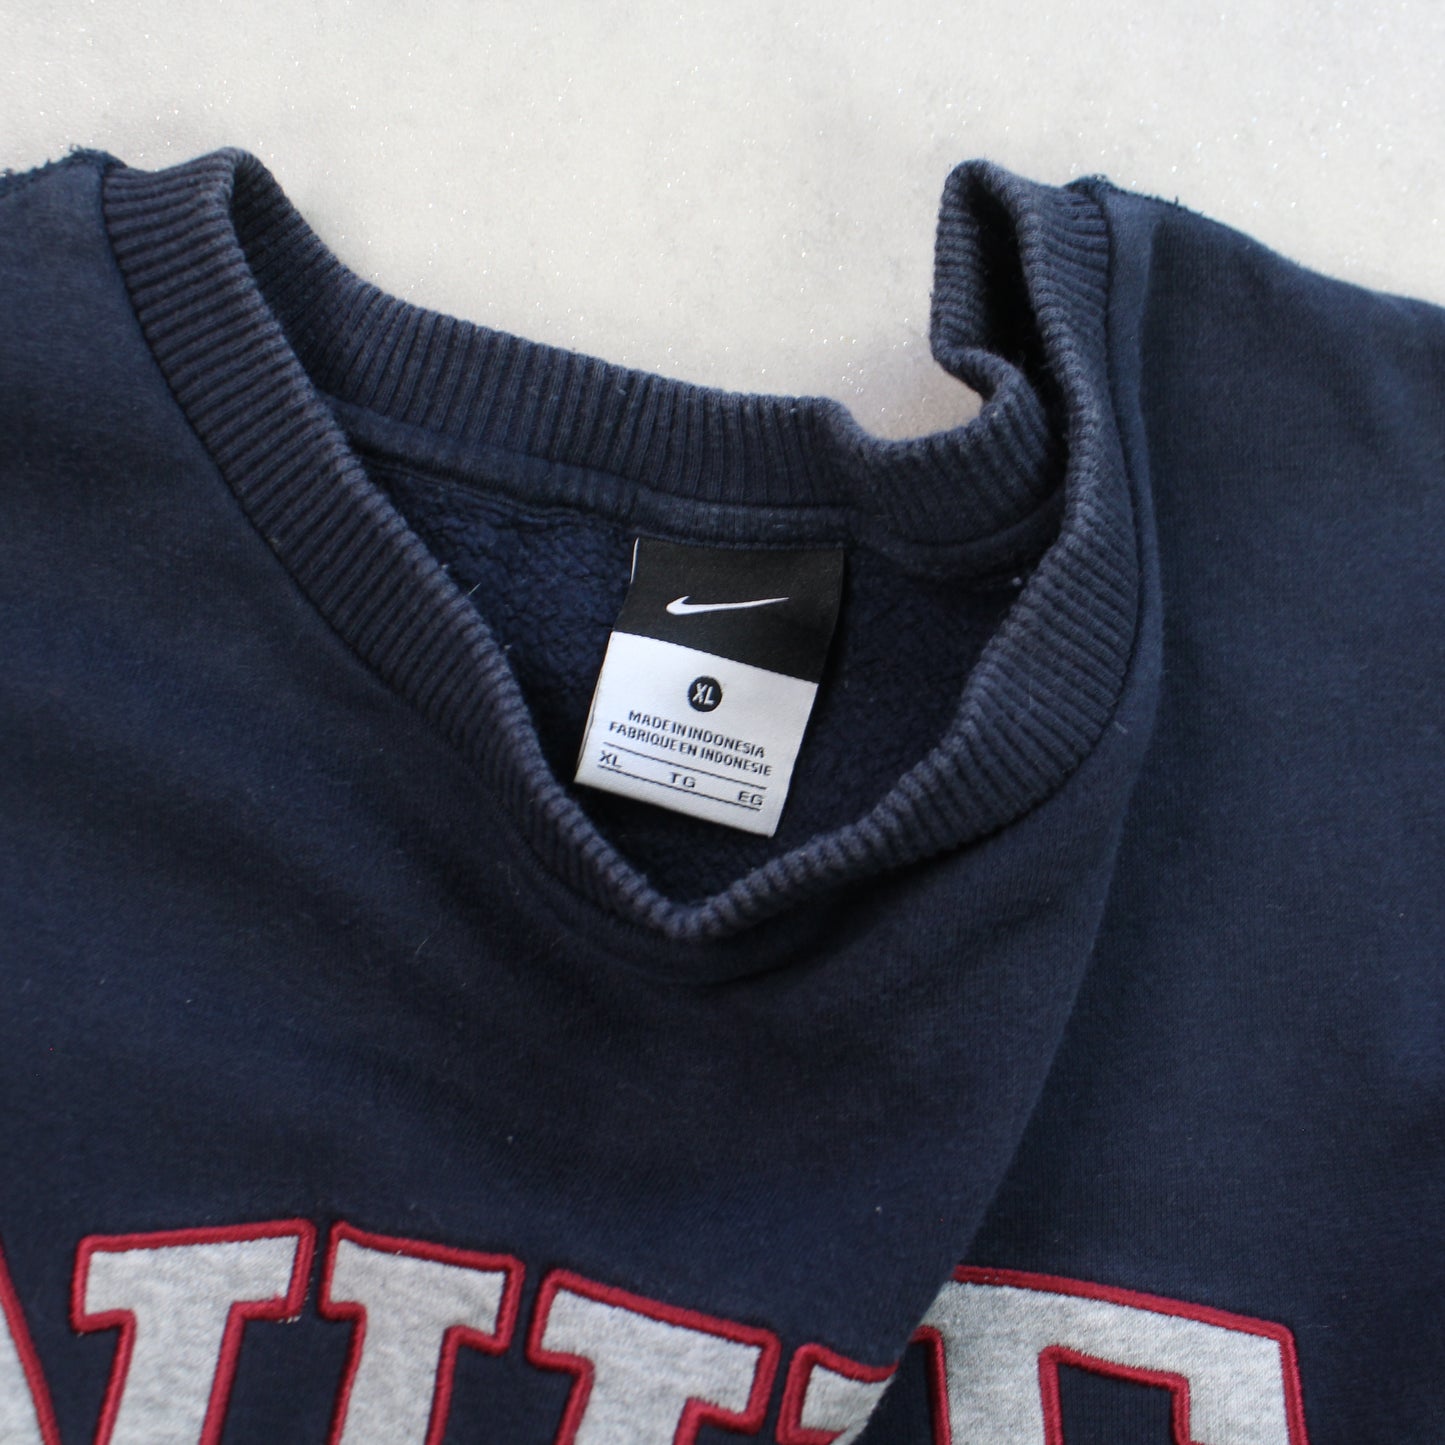 RARE Vintage 00s Nike Spell Out Sweatshirt Navy - (XL)